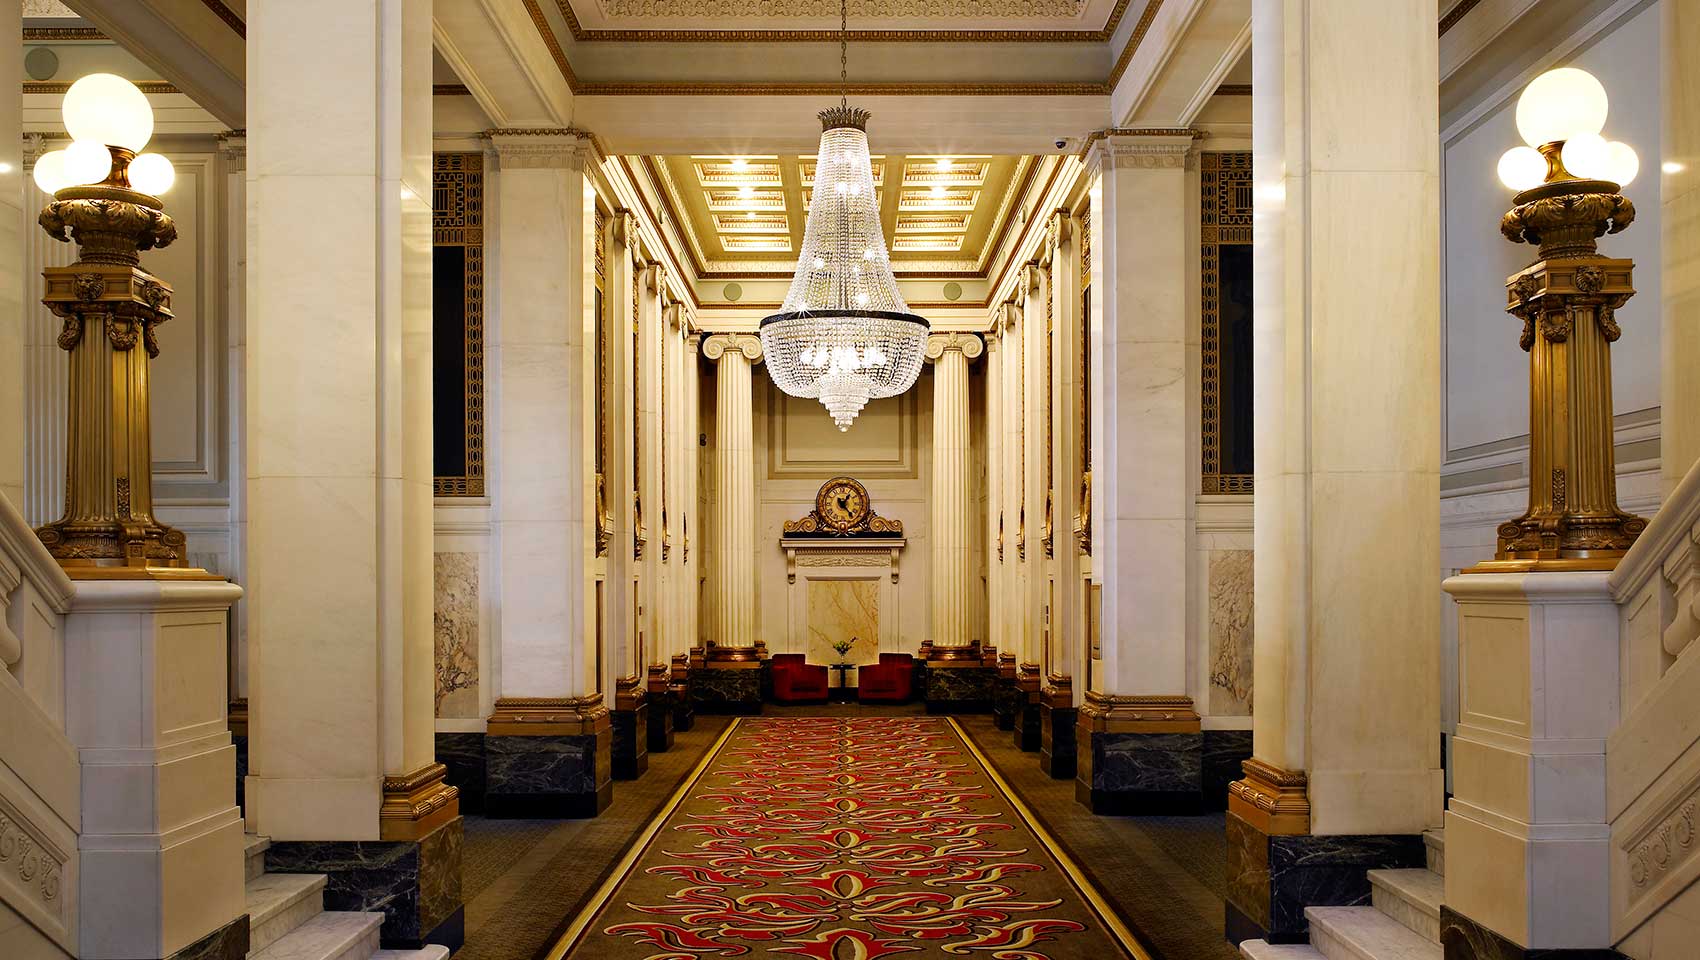 A long hallway with pillars and a chandelier.